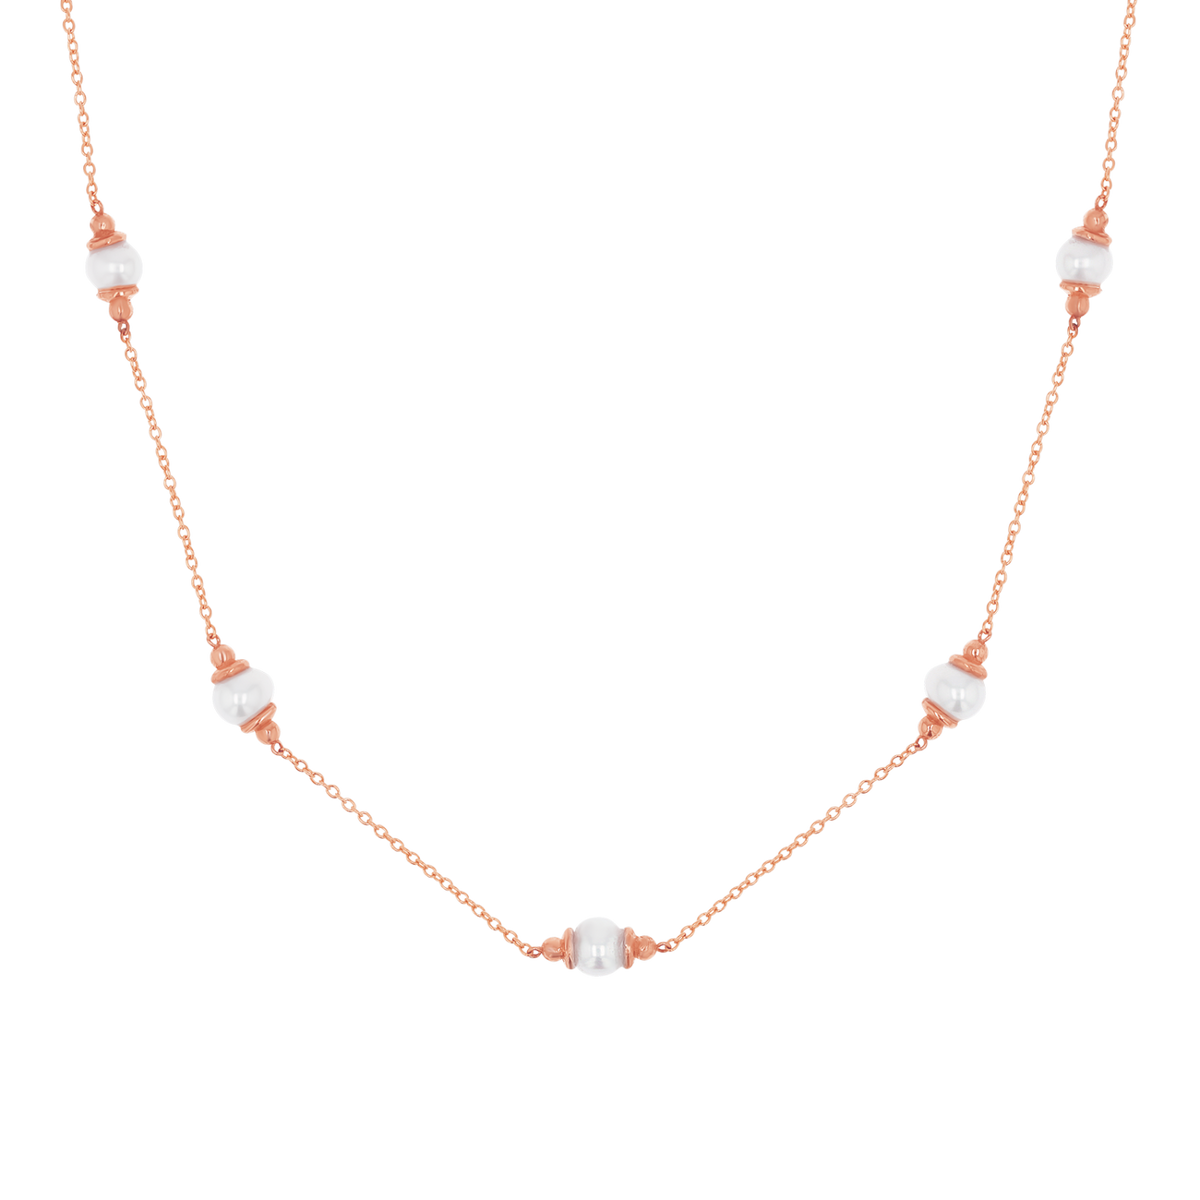 Blush and White Pearl Connector Necklace 14K Yellow Gold / 16 Inches by Baby Gold - Shop Custom Gold Jewelry